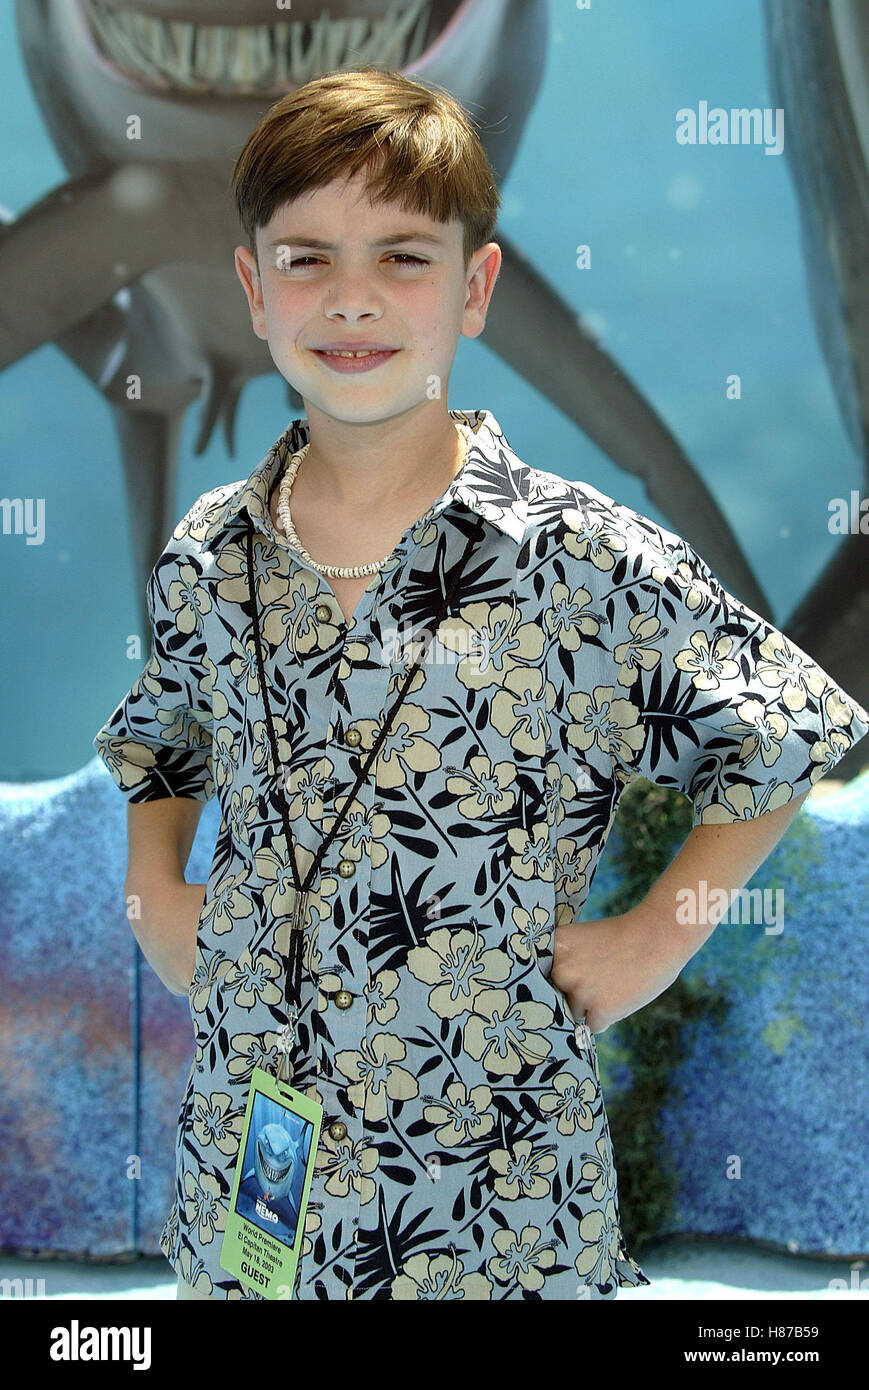 ALEXANDER GOULD FINDING NEMO WORLD PREMIERE HOLLYWOOD LOS ANGELES USA 18 May 2003 Stock Photo